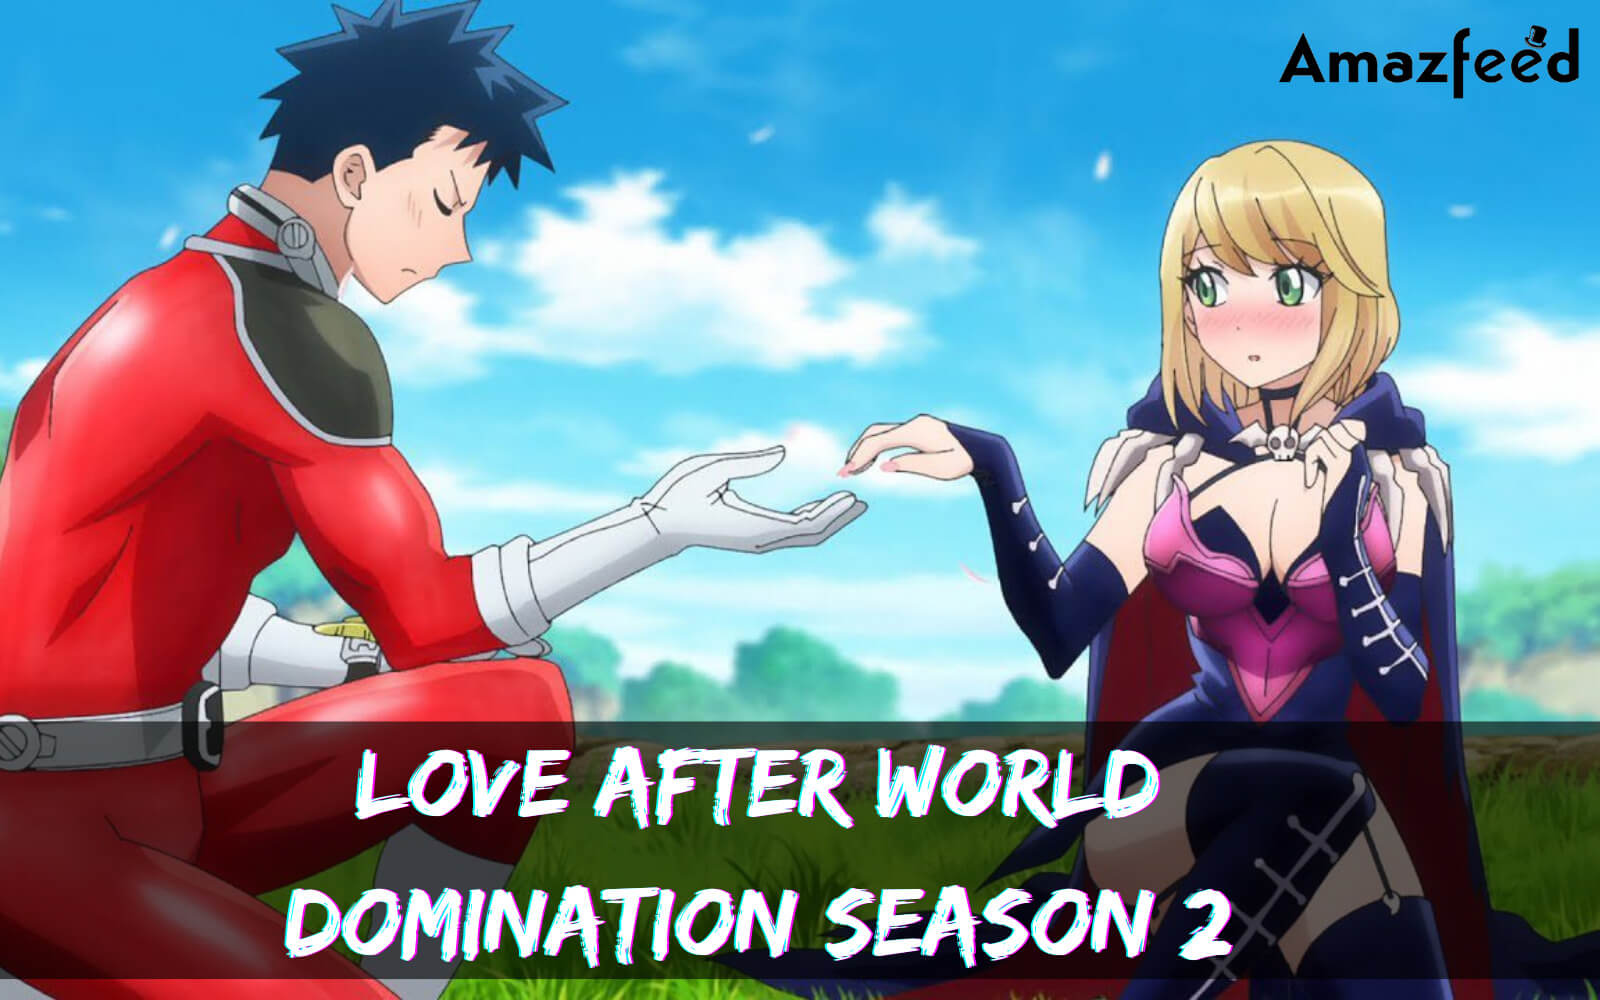 Love after World Domination - The Complete Season (2 Blu-rays) 